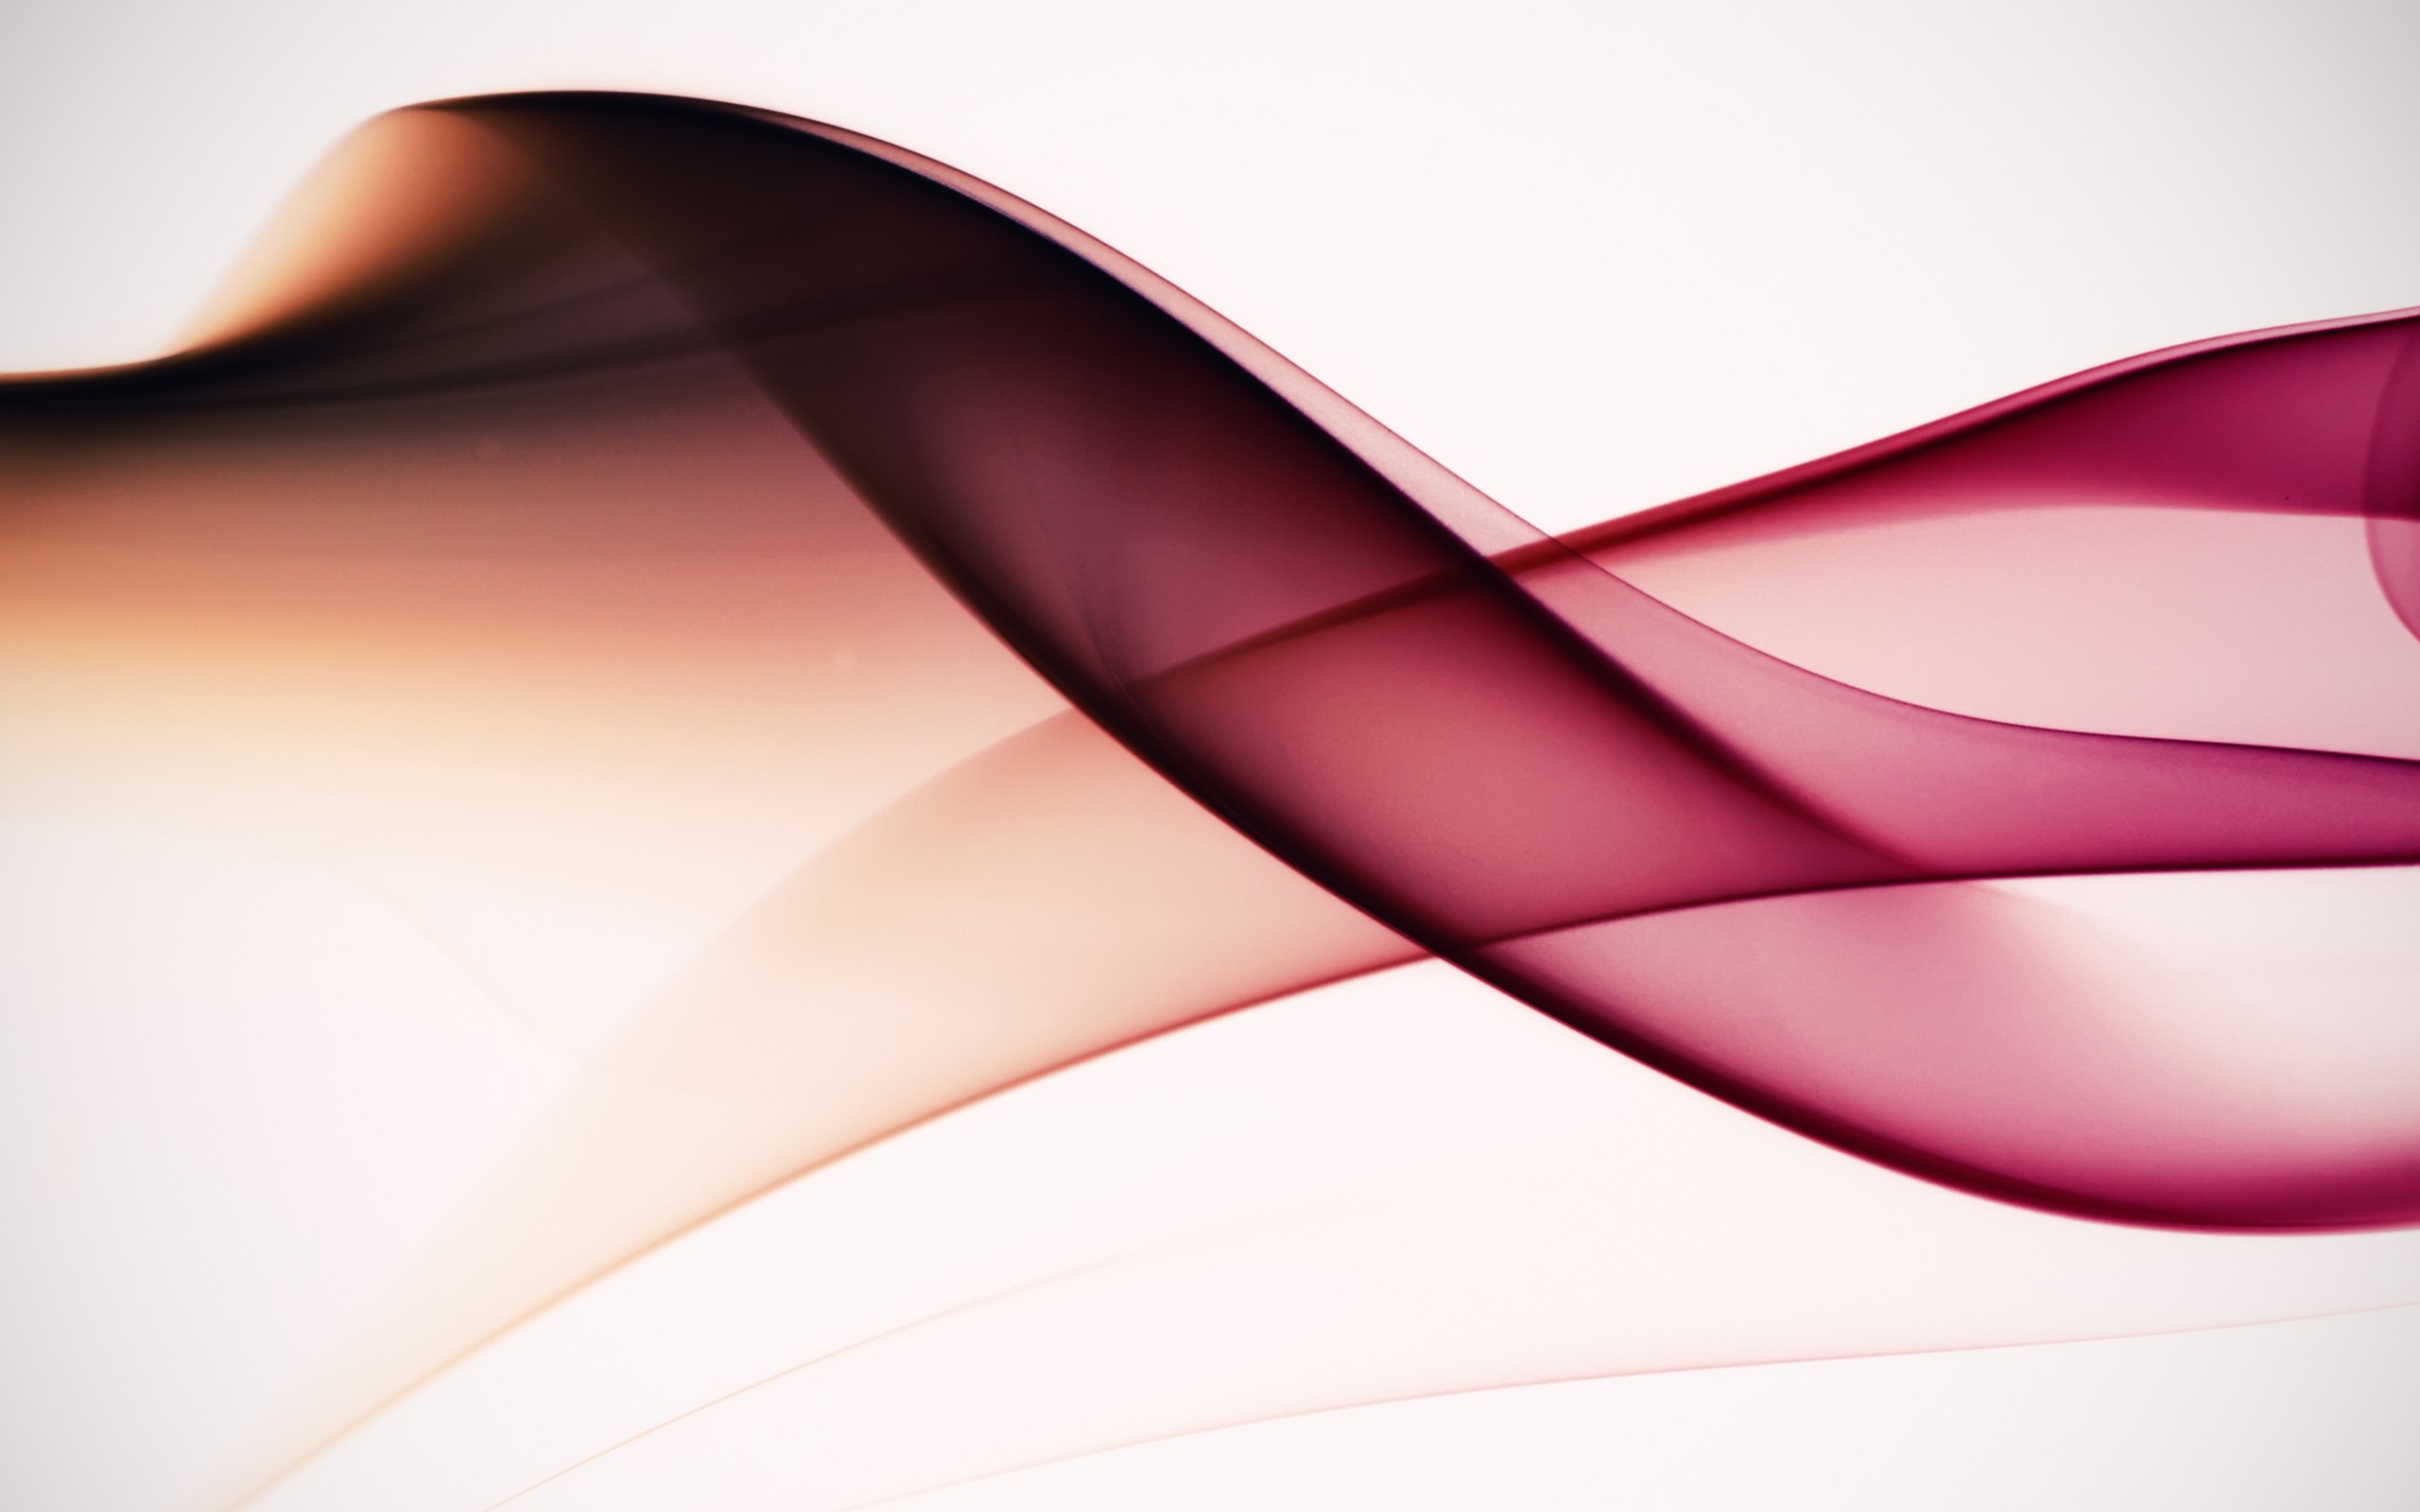 Pink Black and White Abstract Wallpaper HD Wallpaper for your desktop 2560x1600